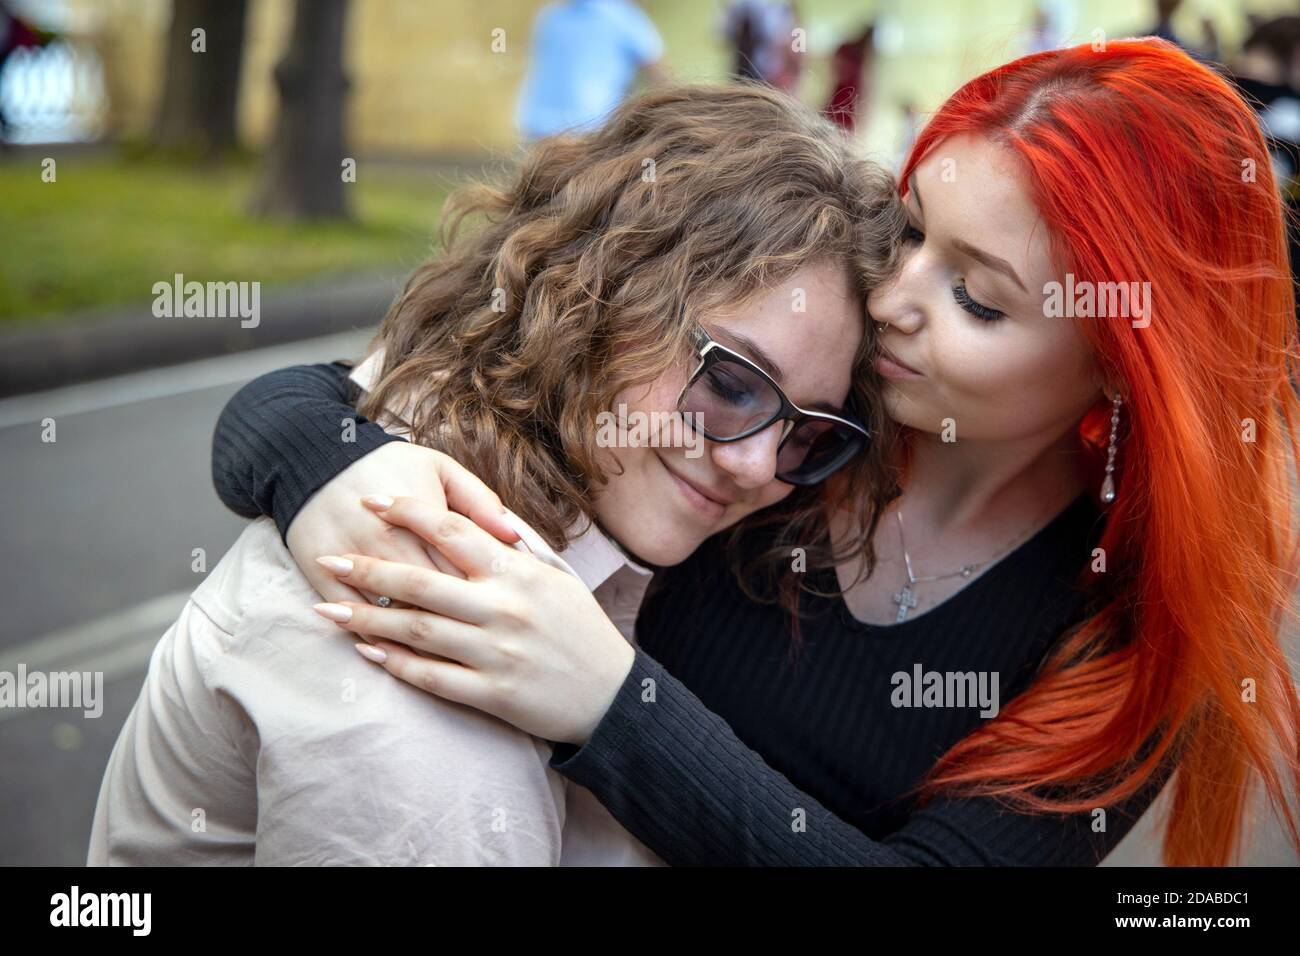 Russia. Moscow 10 July 2020: Two friends a redhead and a brunette meet on a city street and hug Stock Photo